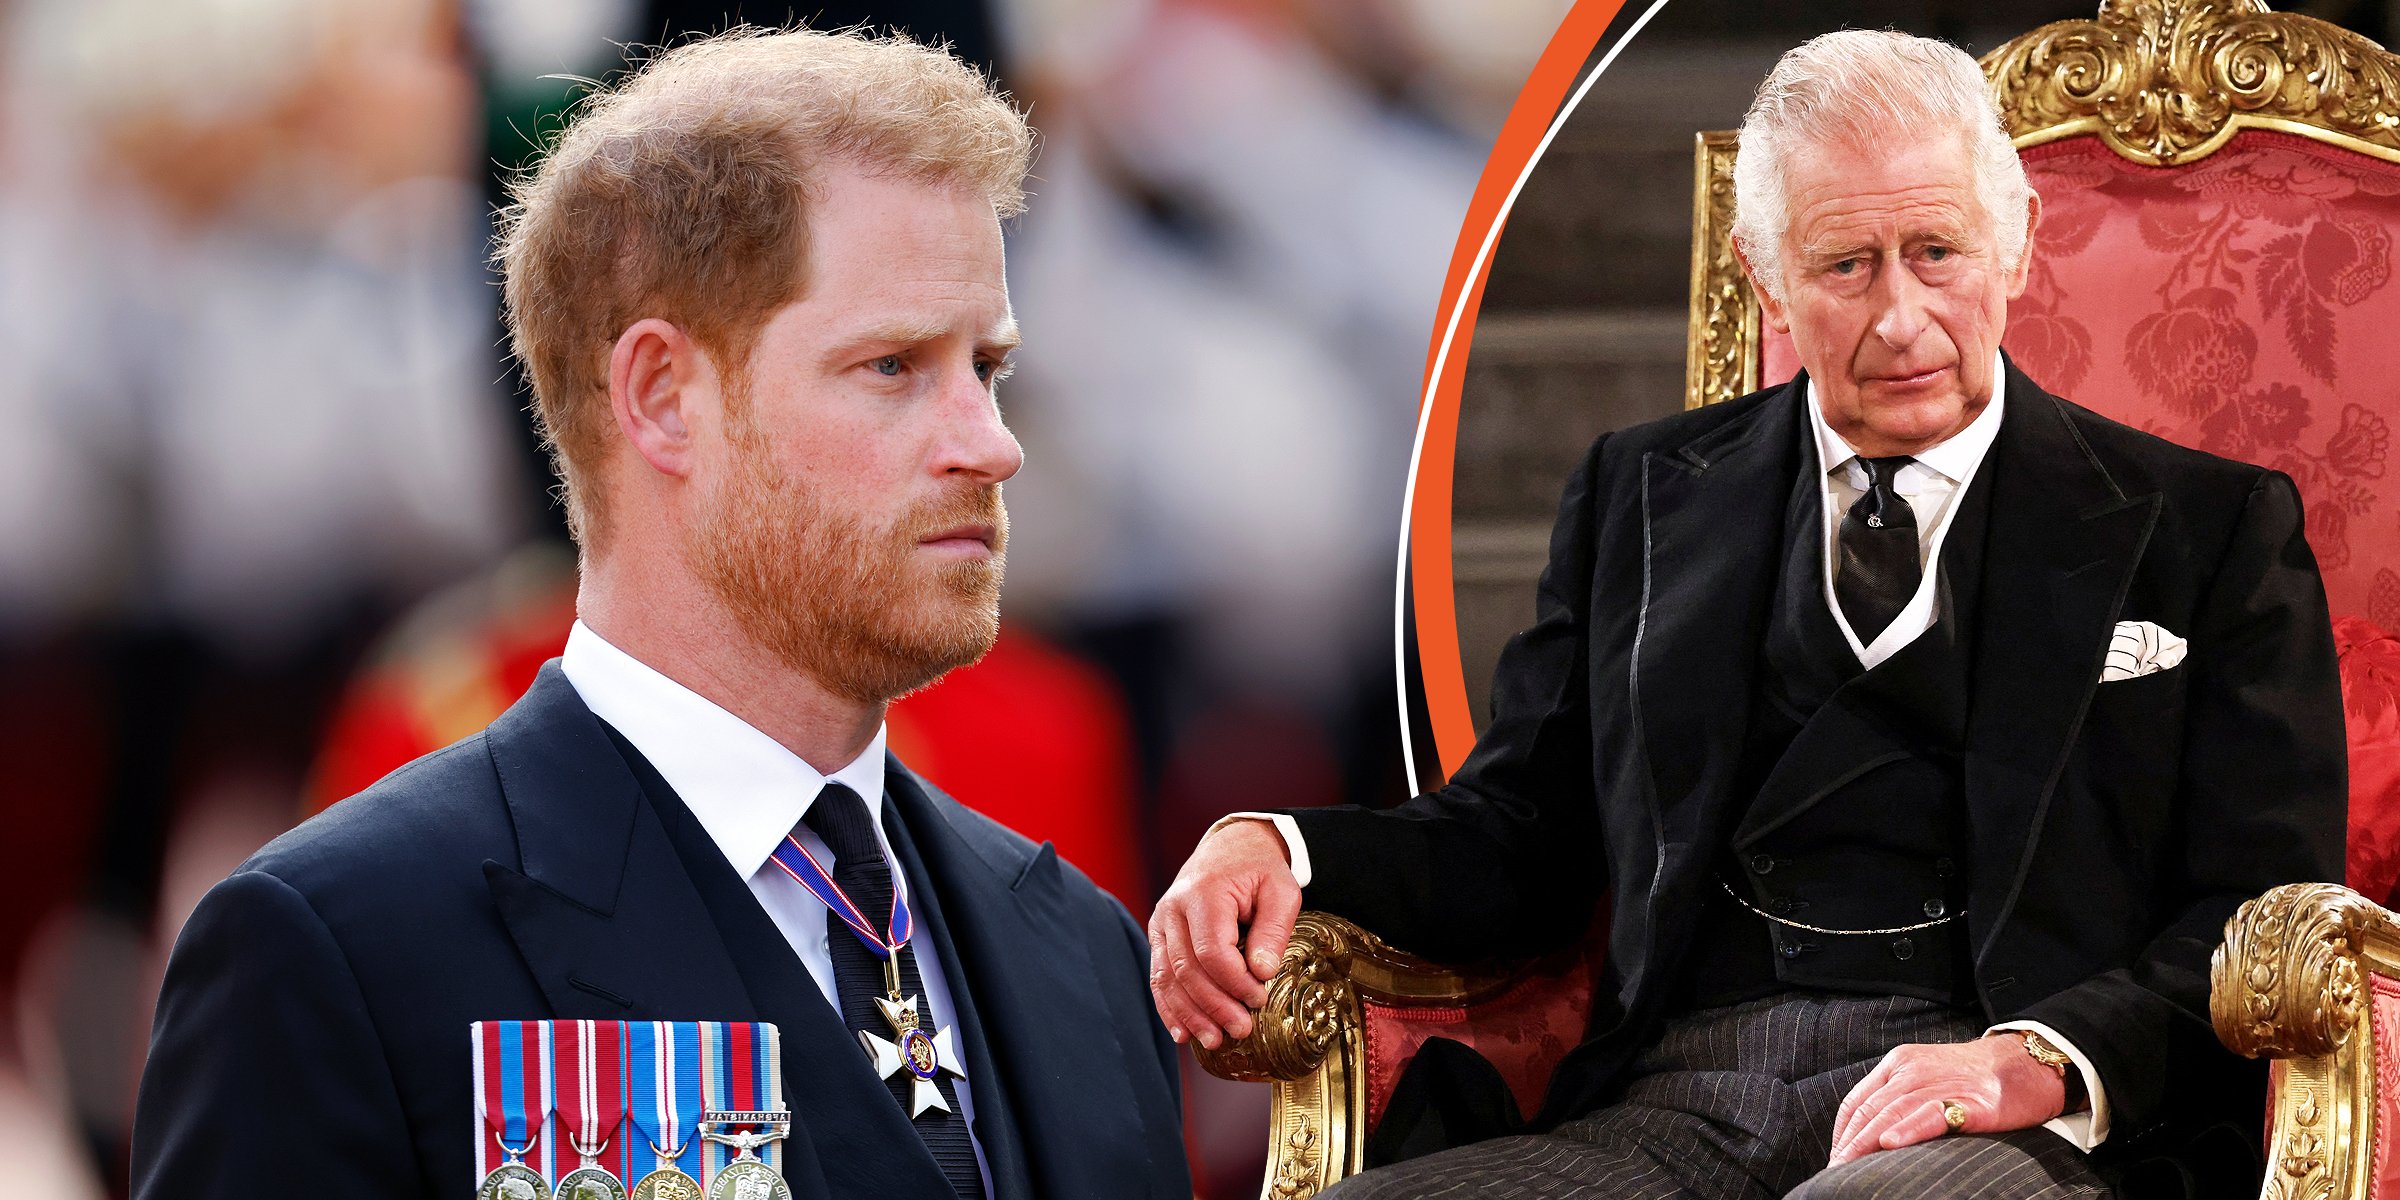 Prince Harry and King Charles III. | Source: Getty Images